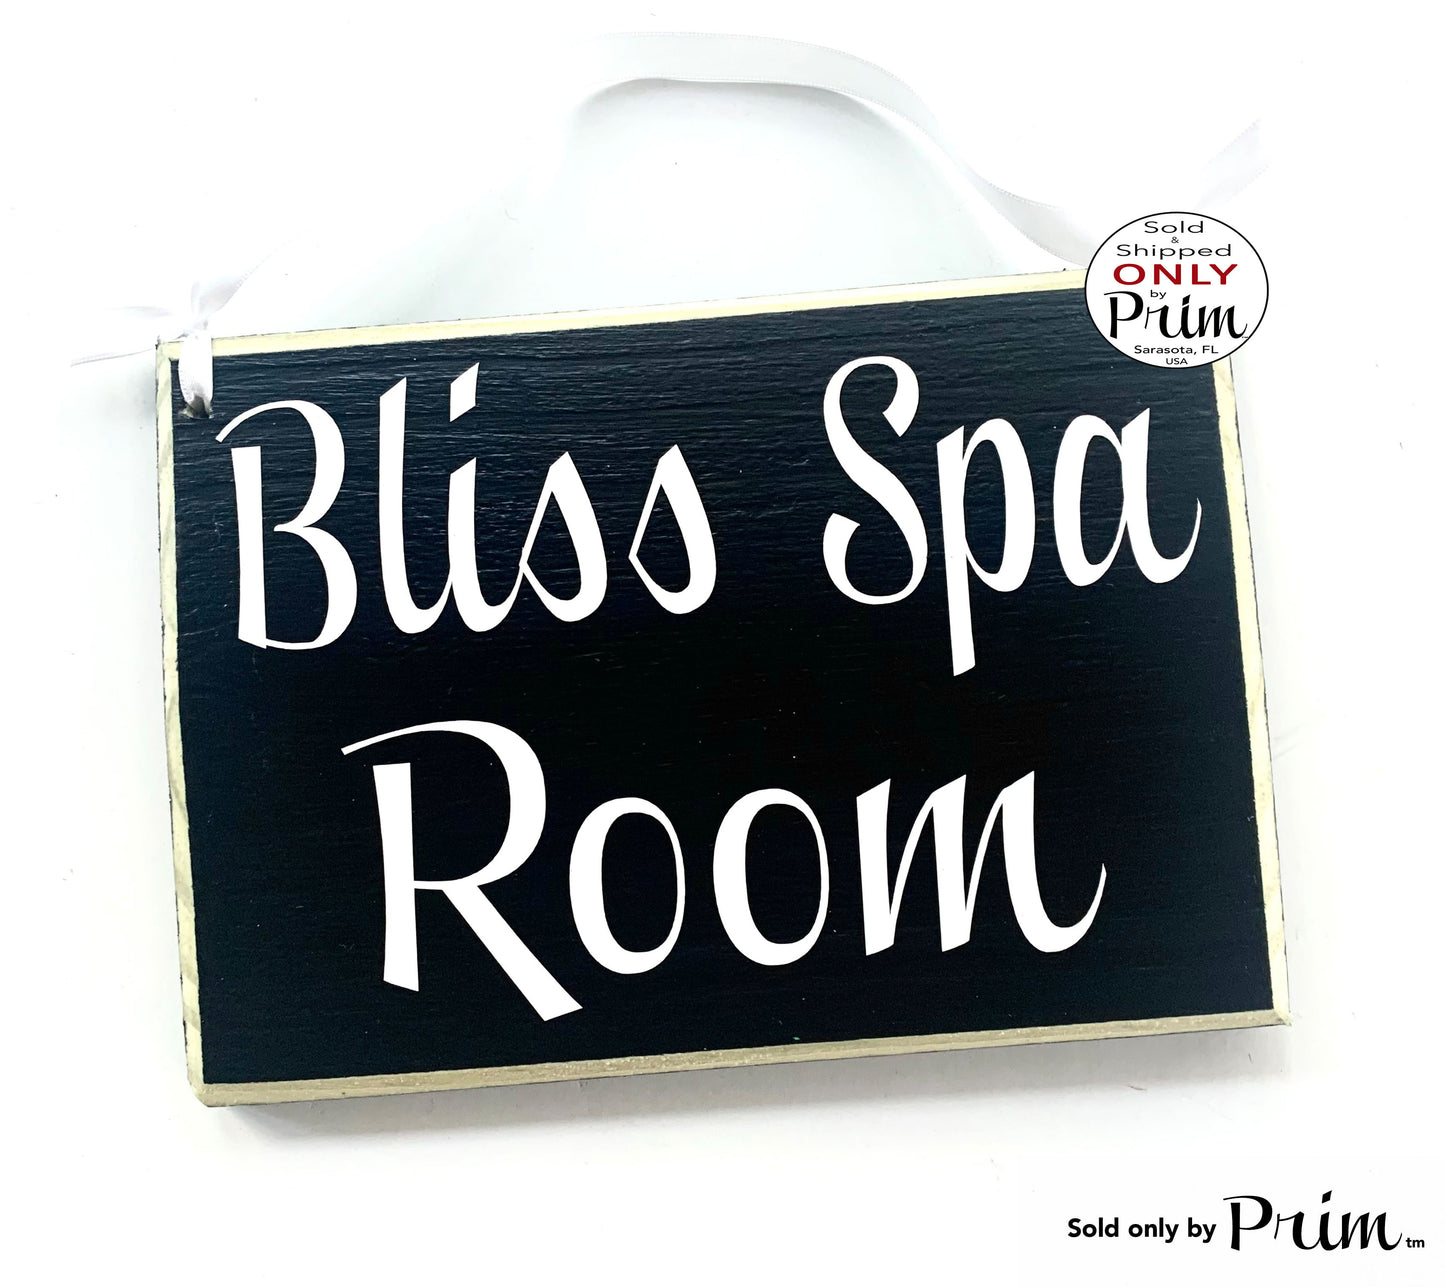 8x6 Personalized Spa Room Custom Wood Sign Service Salon Massage Facial In Session Progress Therapy Please Do Not Disturb Door Plaque Designs by Prim